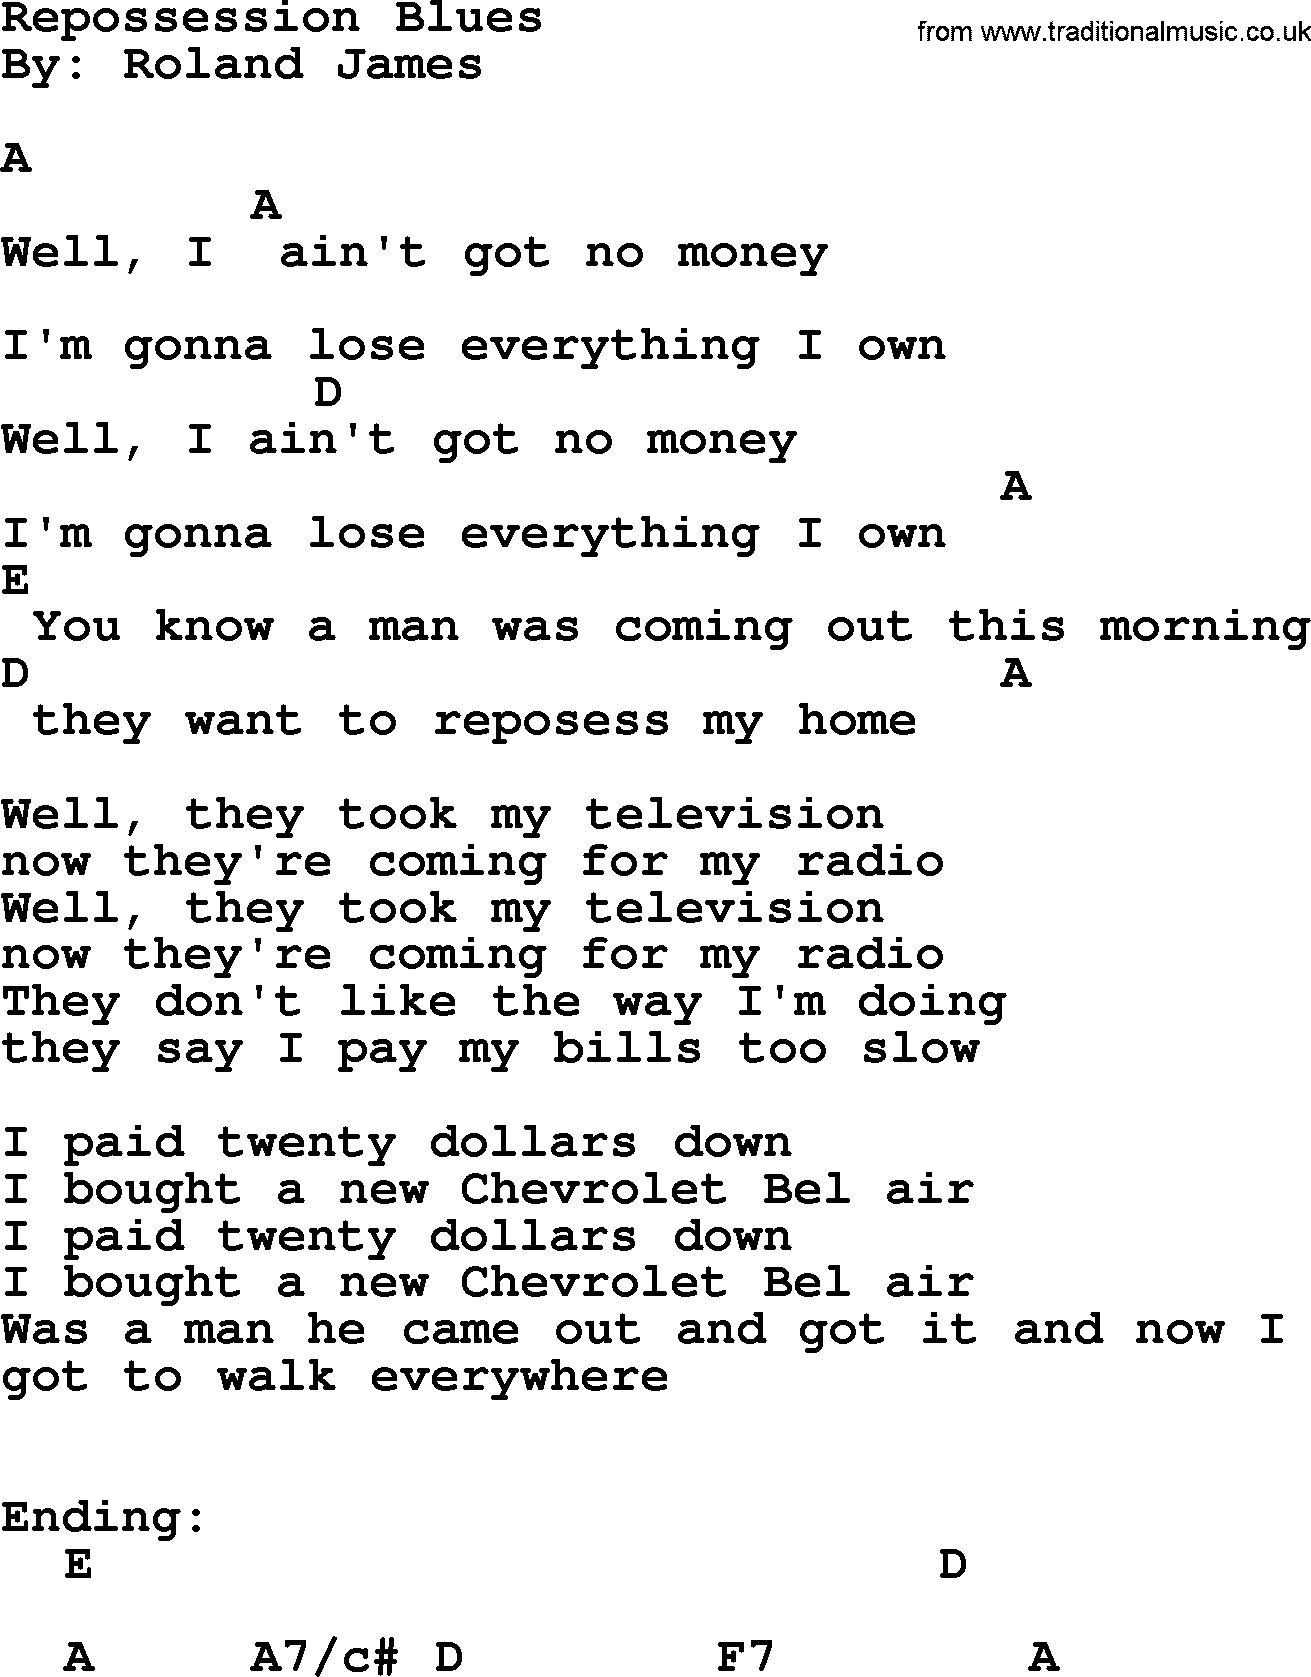 Bob Dylan song, lyrics with chords - Repossession Blues